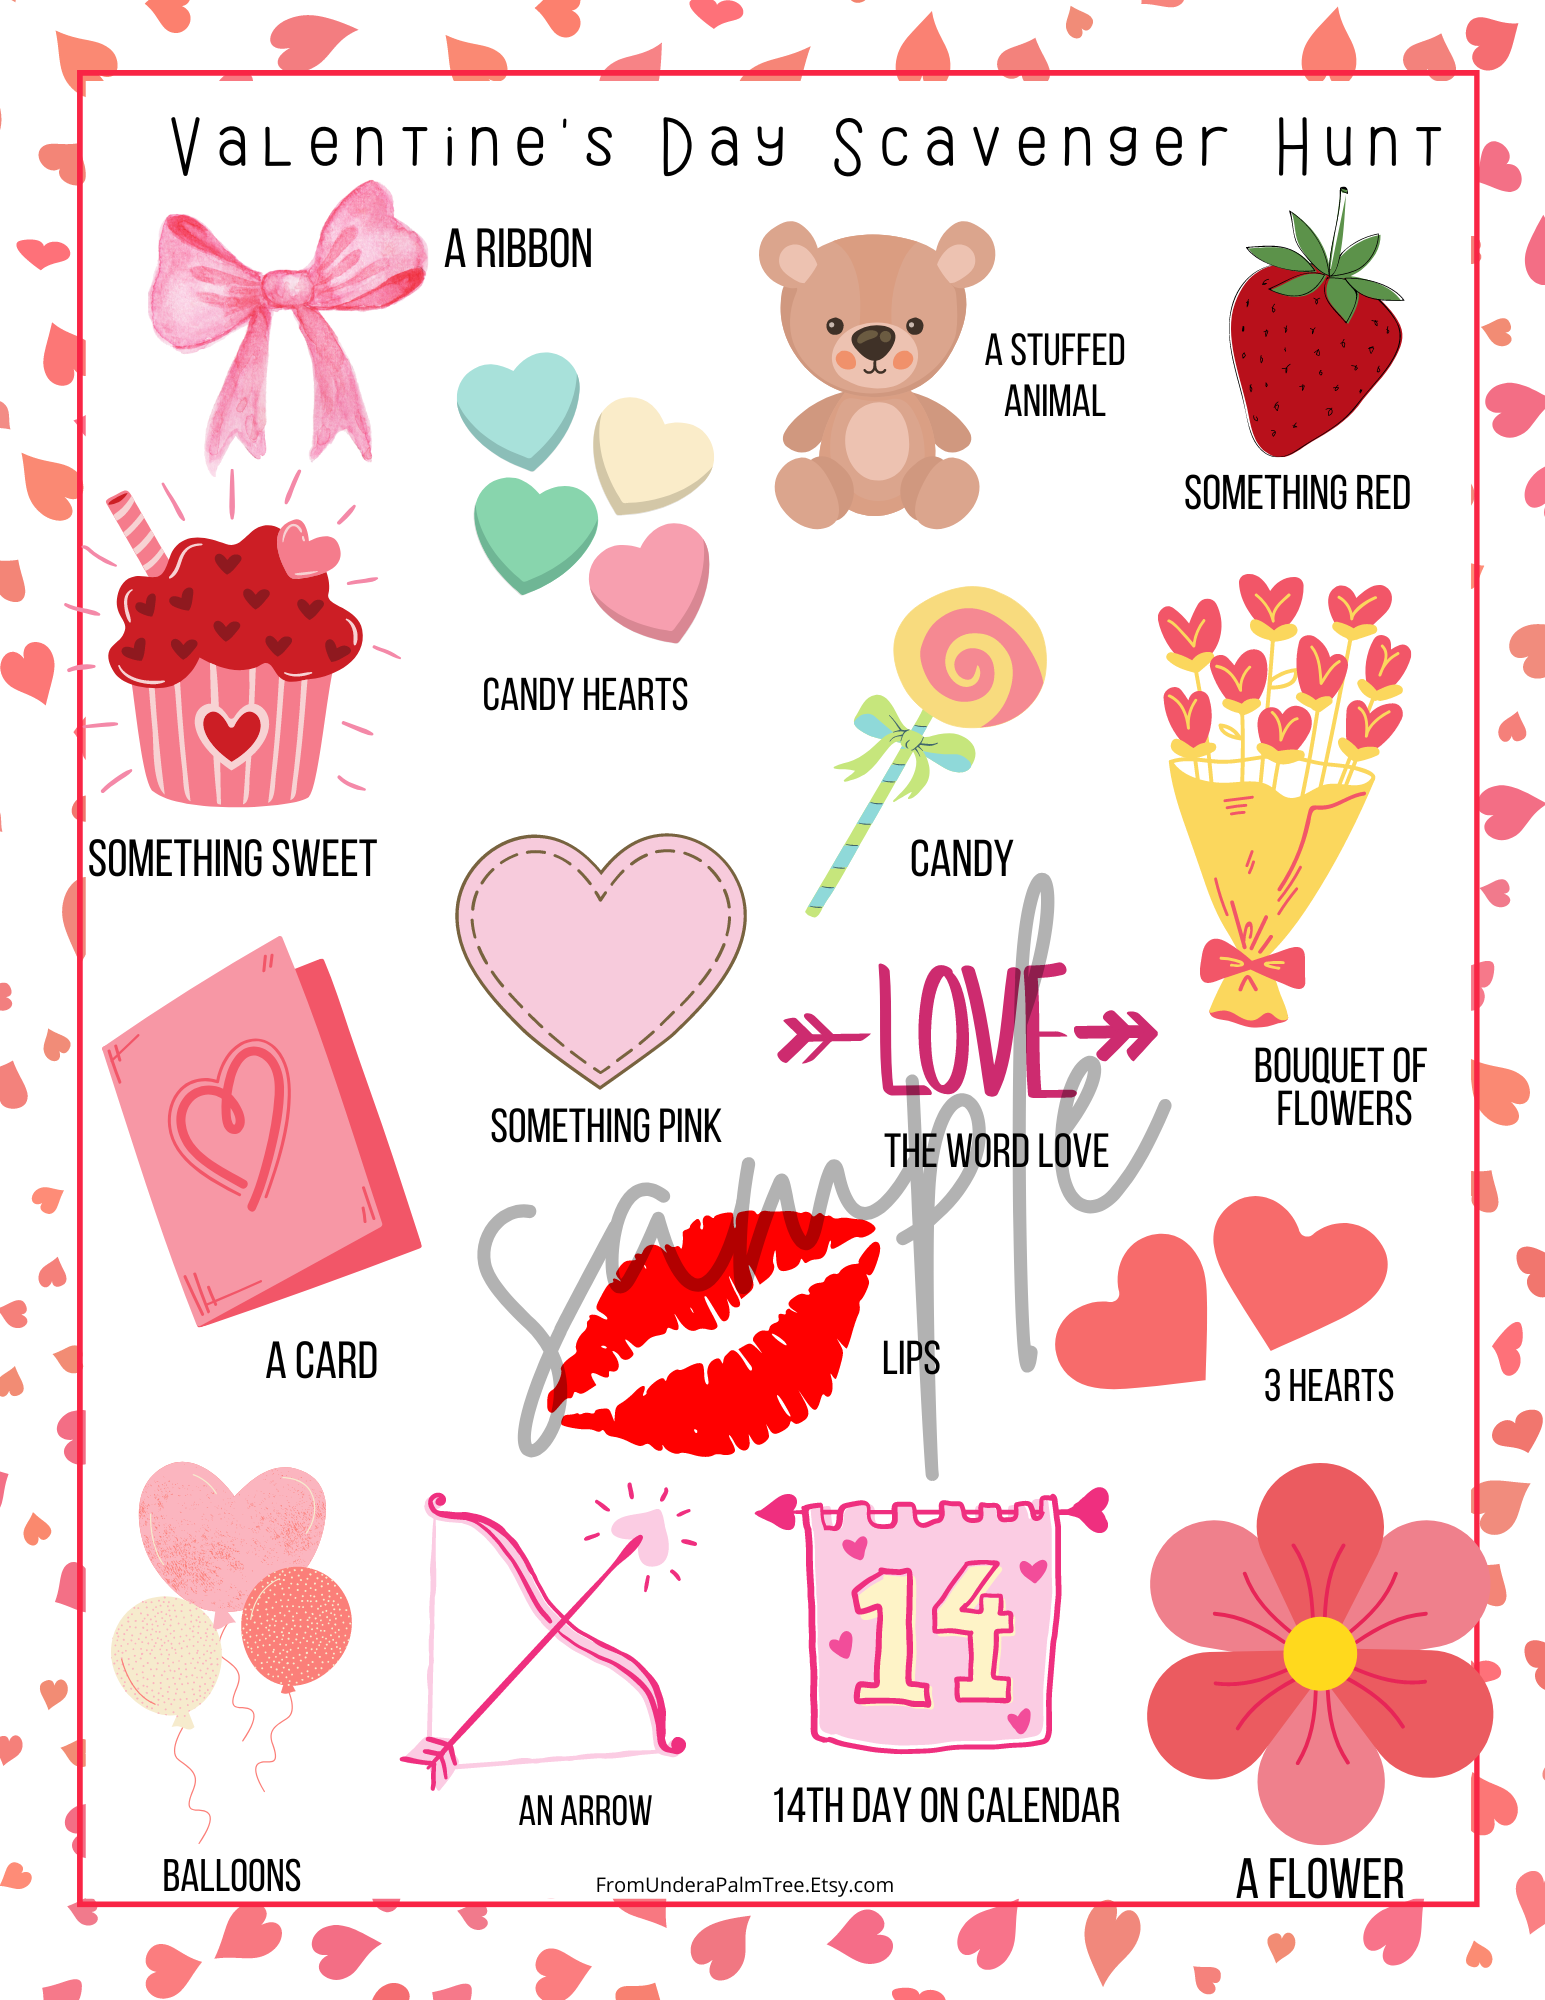 valentines day | valentines day worksheets | valentines day activity | valentines day printables | valentines day worksheet | valentines day scavenger hunt | valentines day math worksheets | valentines day kindergarten worksheets | valentines day first grade worksheets | valentines day worksheet | valentines day word search | valentines day graphing | valentines day mazes | valentines day coloring sheets | valentines day color by numbers | candy hearts activity | candy hearts math | candy hearts worksheet | printables for kids | homeschool lesson plan | homeschooling | teacher resources | first grade printables | kindergarten printables |